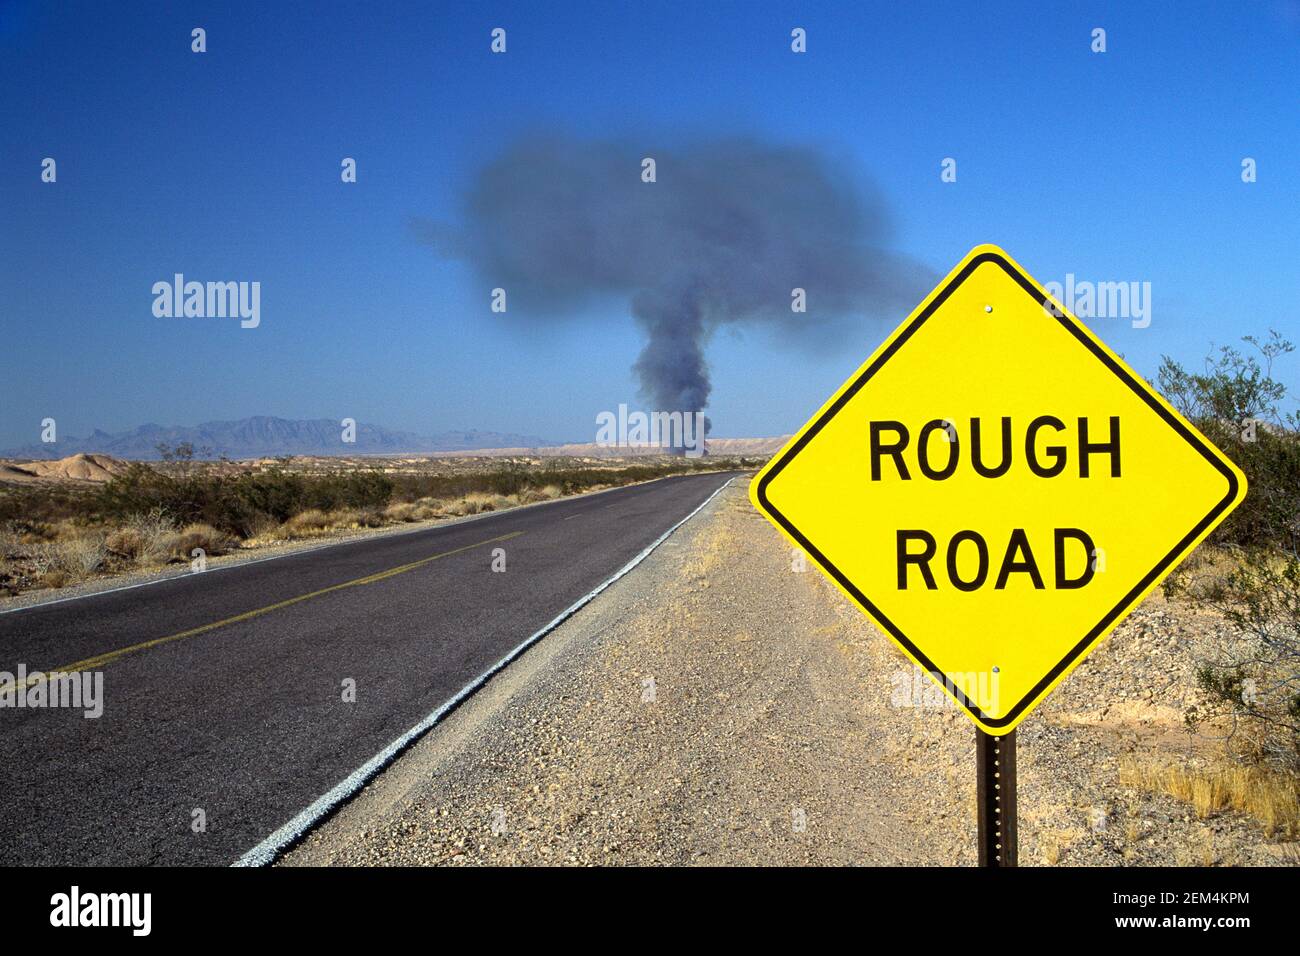 'Rough Road' ahead, yellow highway sign in front of mushroom shaped smoke cloud on road in western US. Concept: 'trouble ahead' Stock Photo